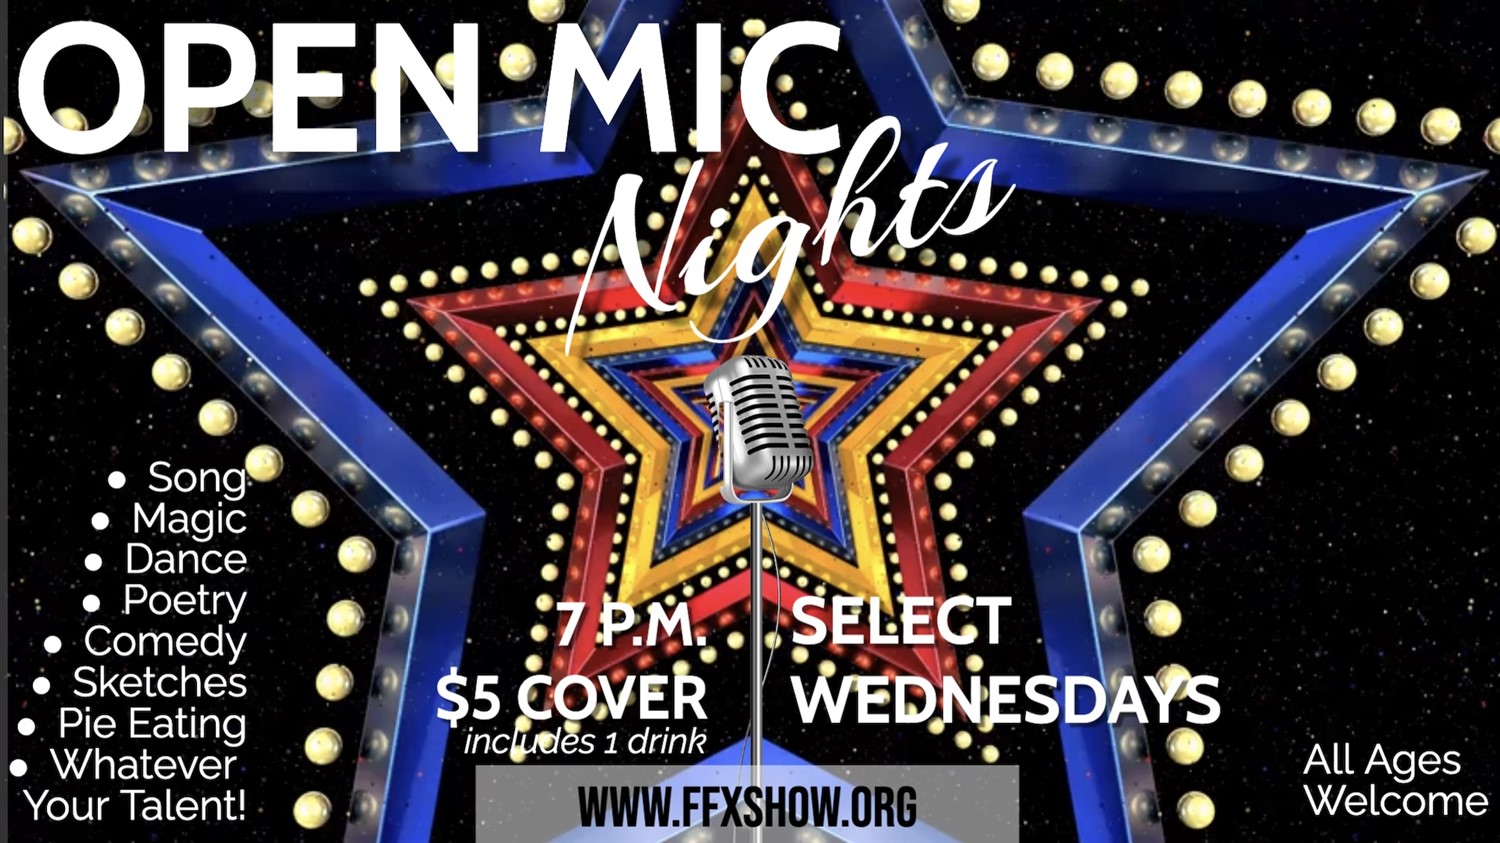 OPEN MIC NIGHT Come out to enjoy or share your talents on the FFX Stage! on feb. 22, 19:00@FFX Theatre - Compra entradas y obtén información enFamily Fun Xperience tickets.ffxshow.org